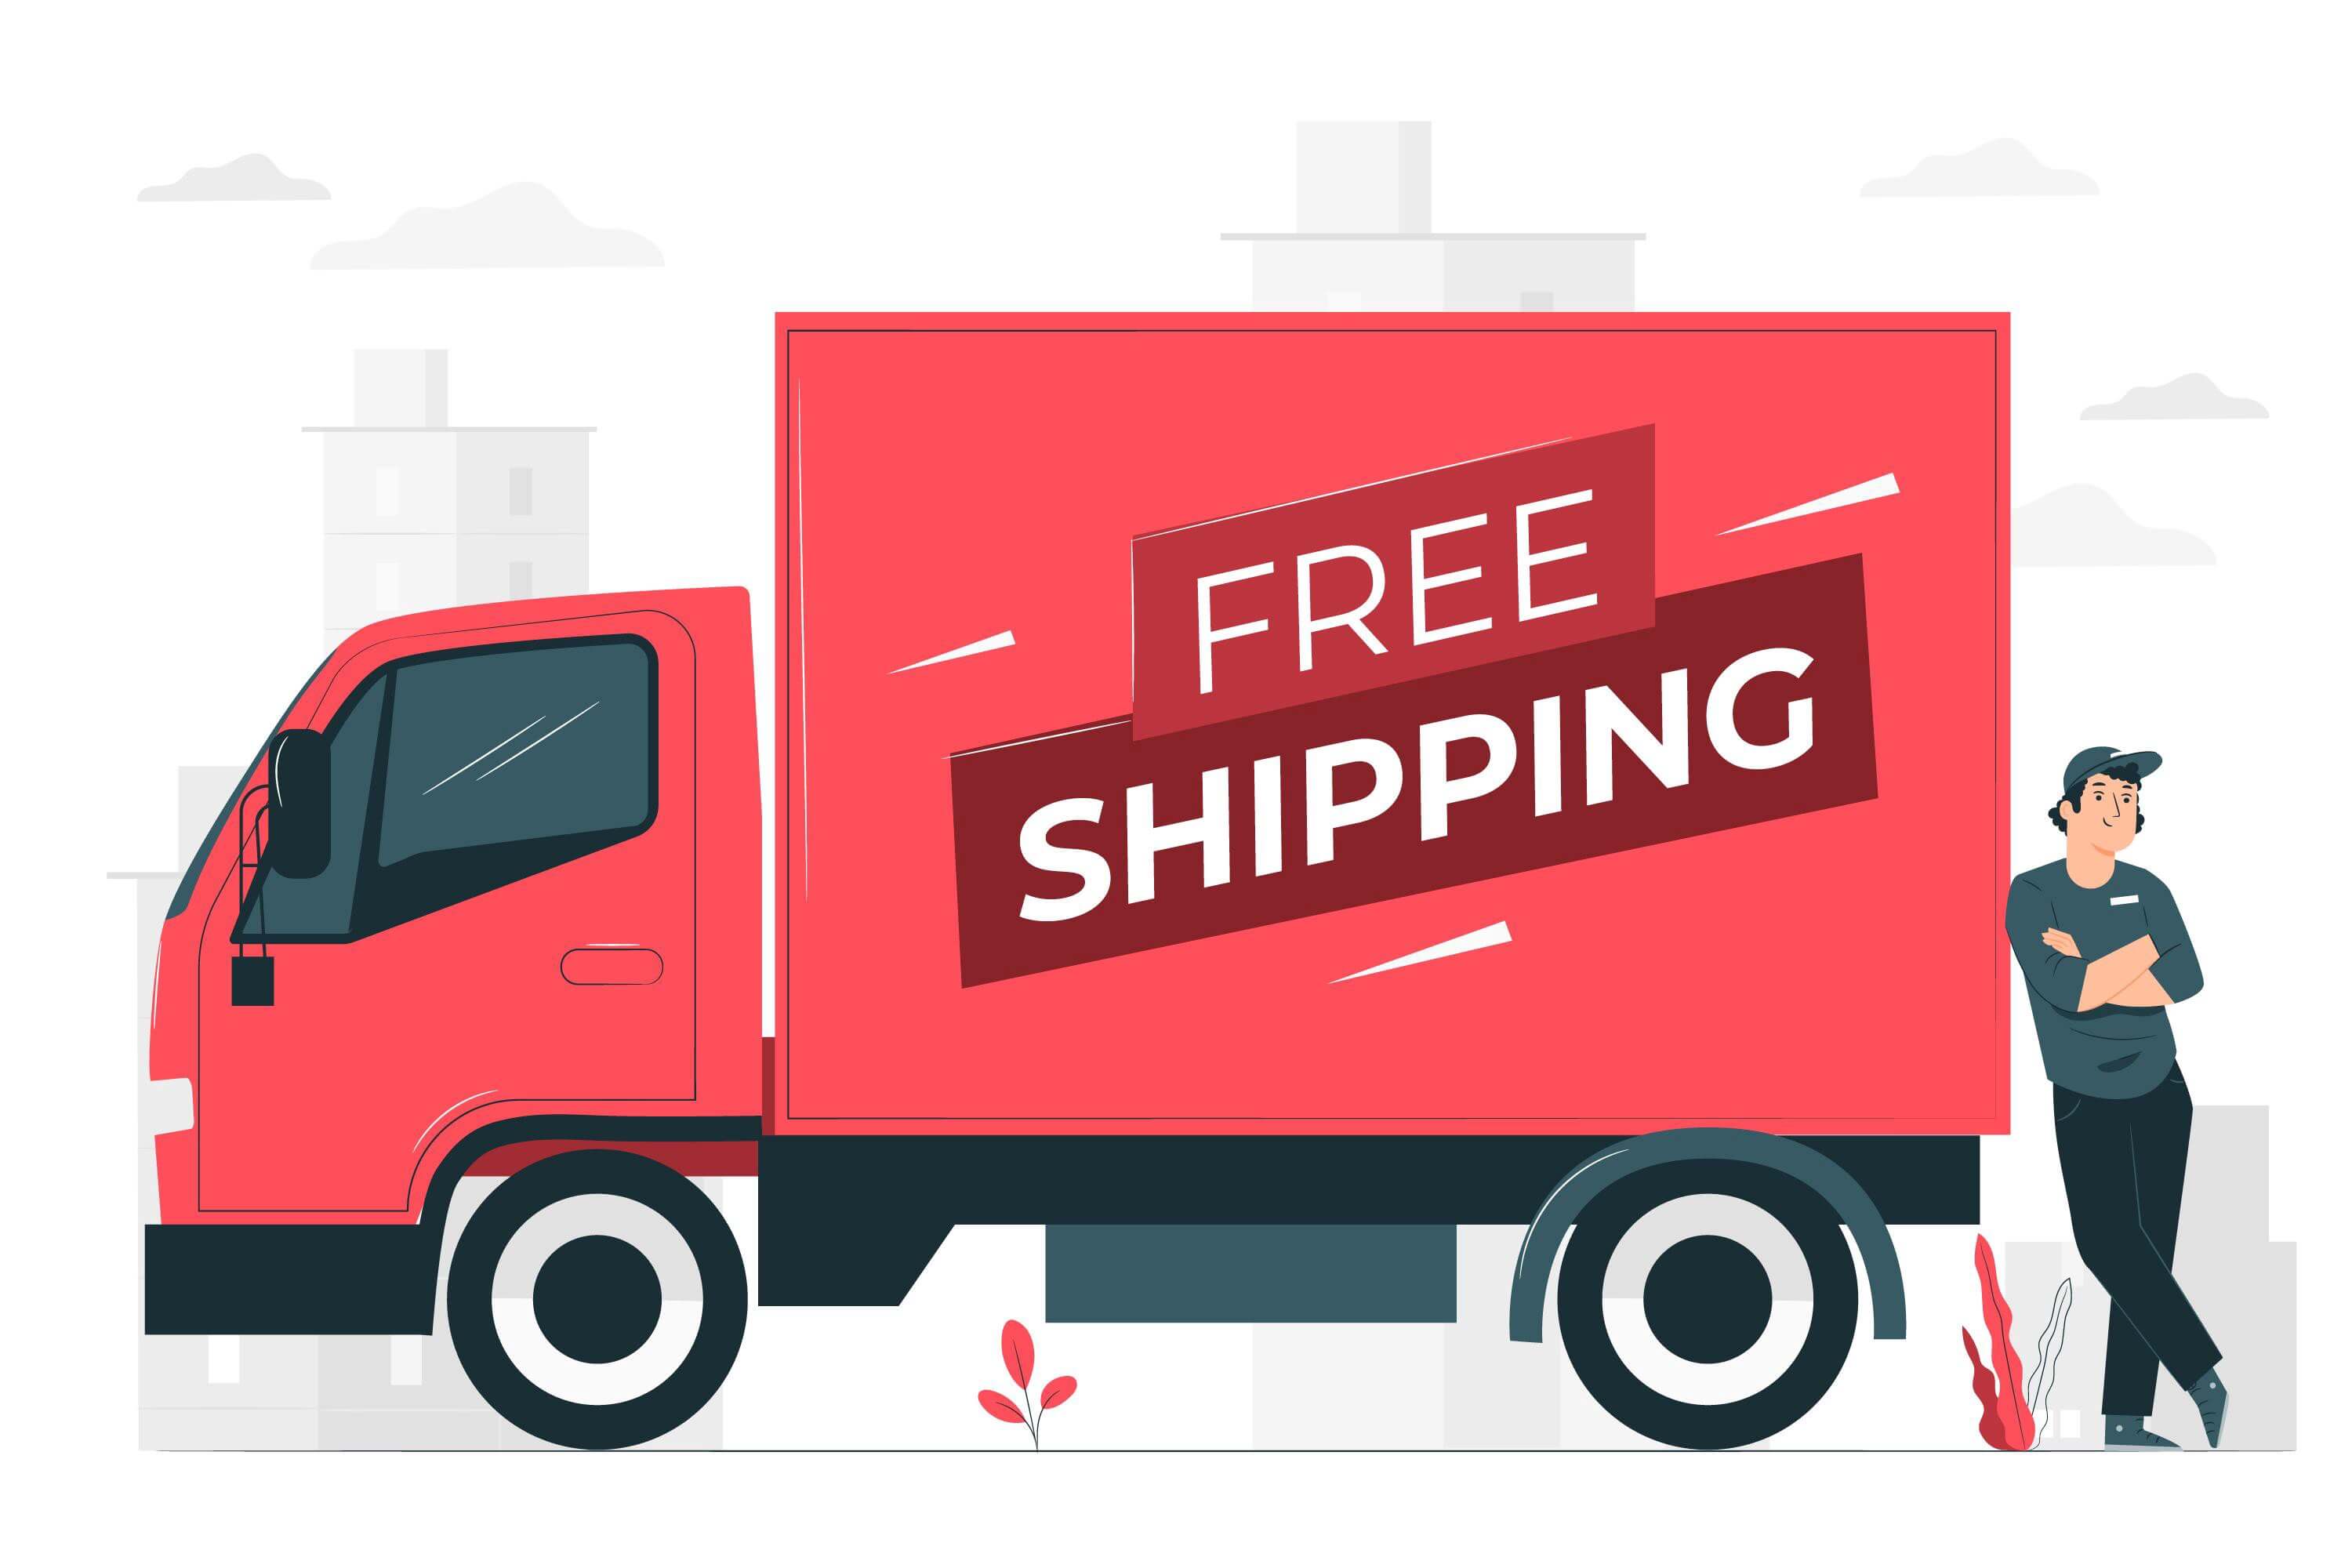 Use free shipping offers to optimize conversion for your Shopify store.